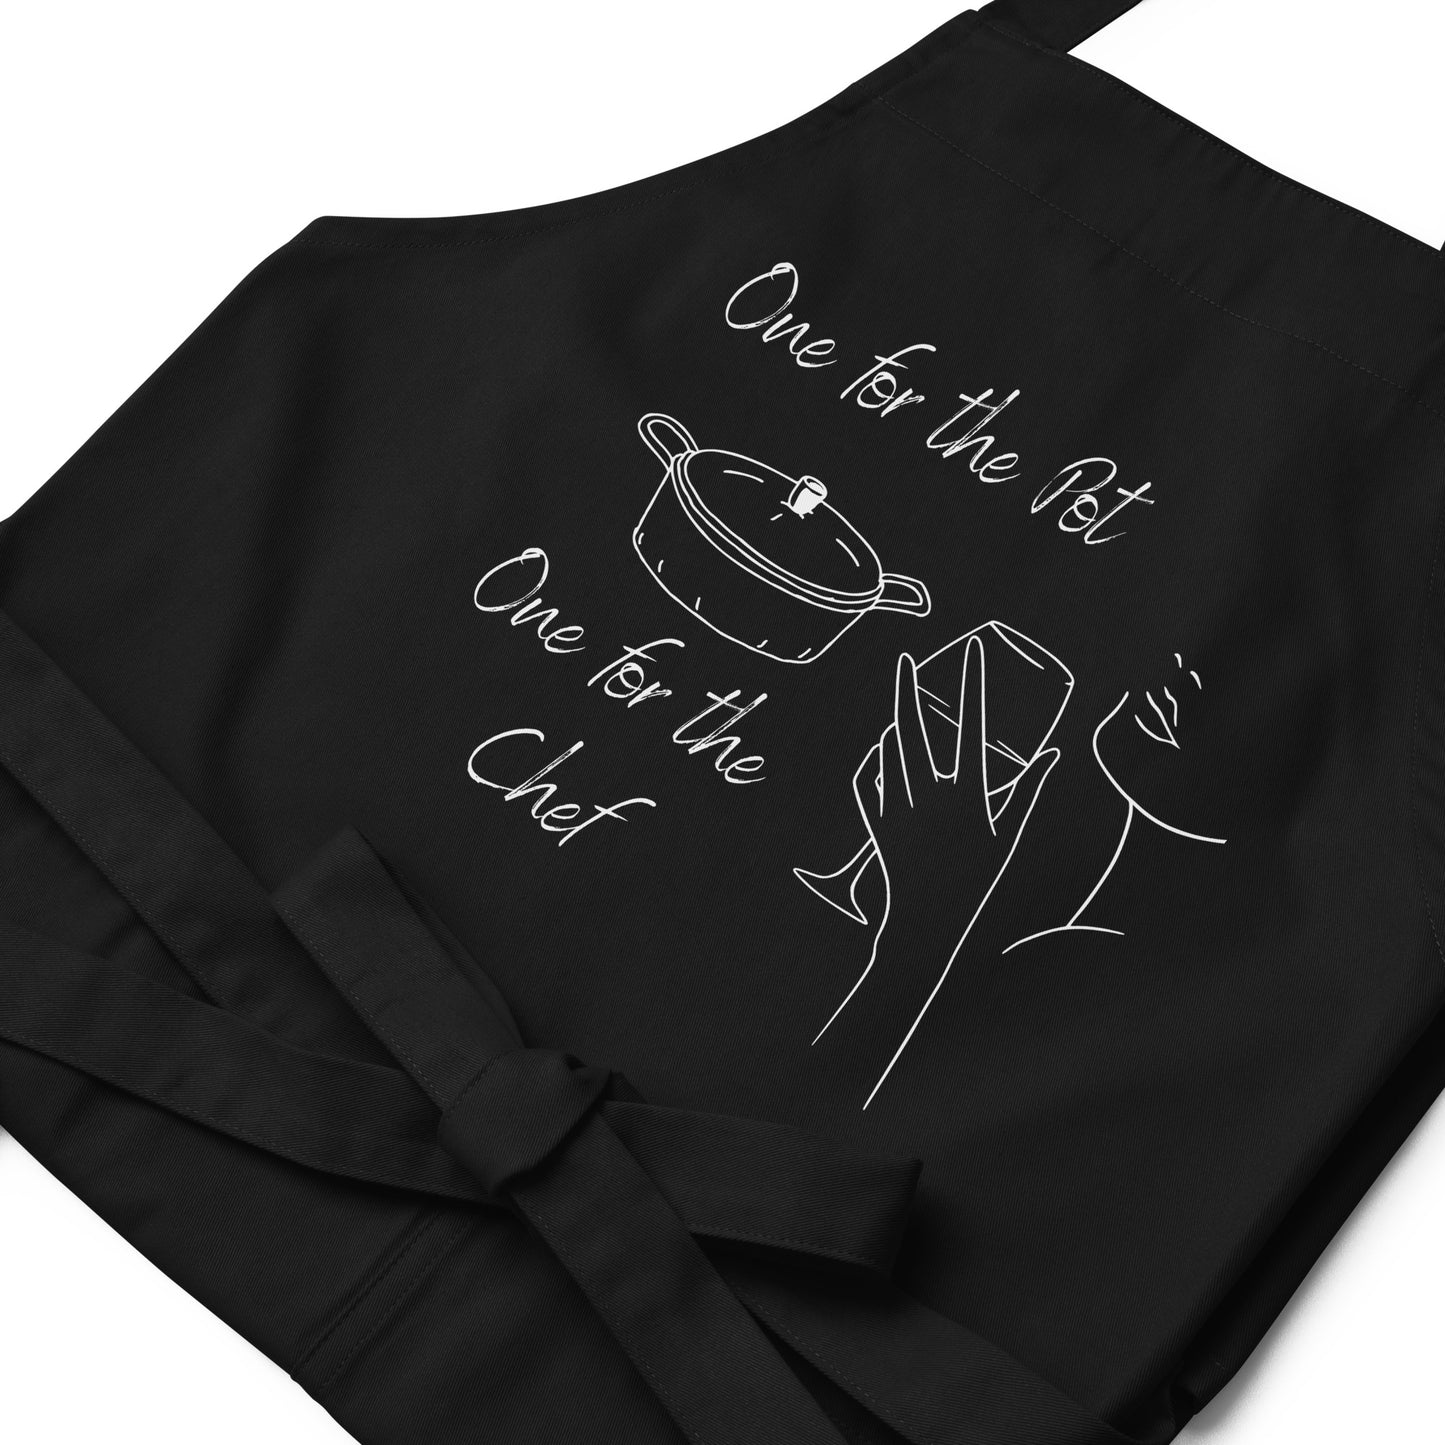 One for the Pot One for the Chef - Organic cotton apron